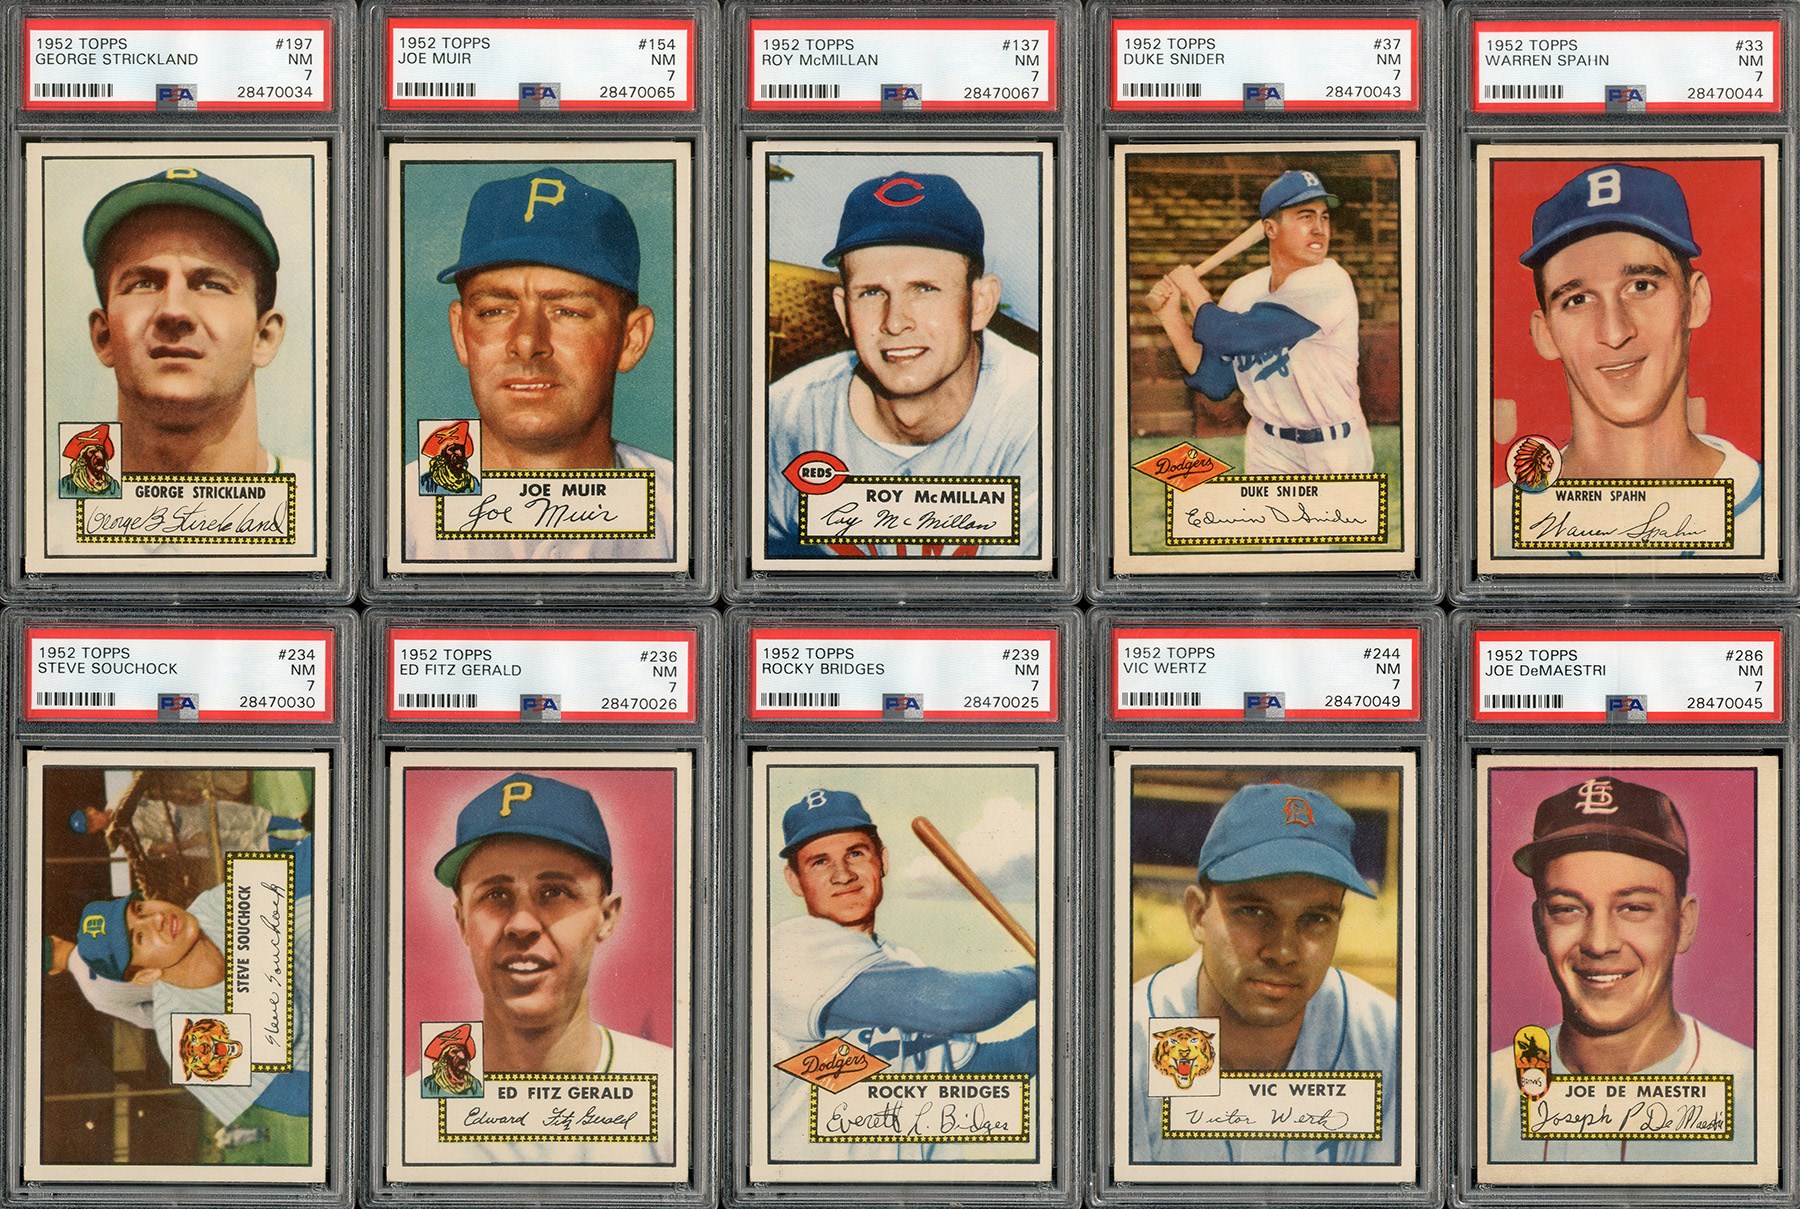 1952 Topps High Grade Lot of 14 Cards with 3 HOFers - all PSA Graded NM 7!